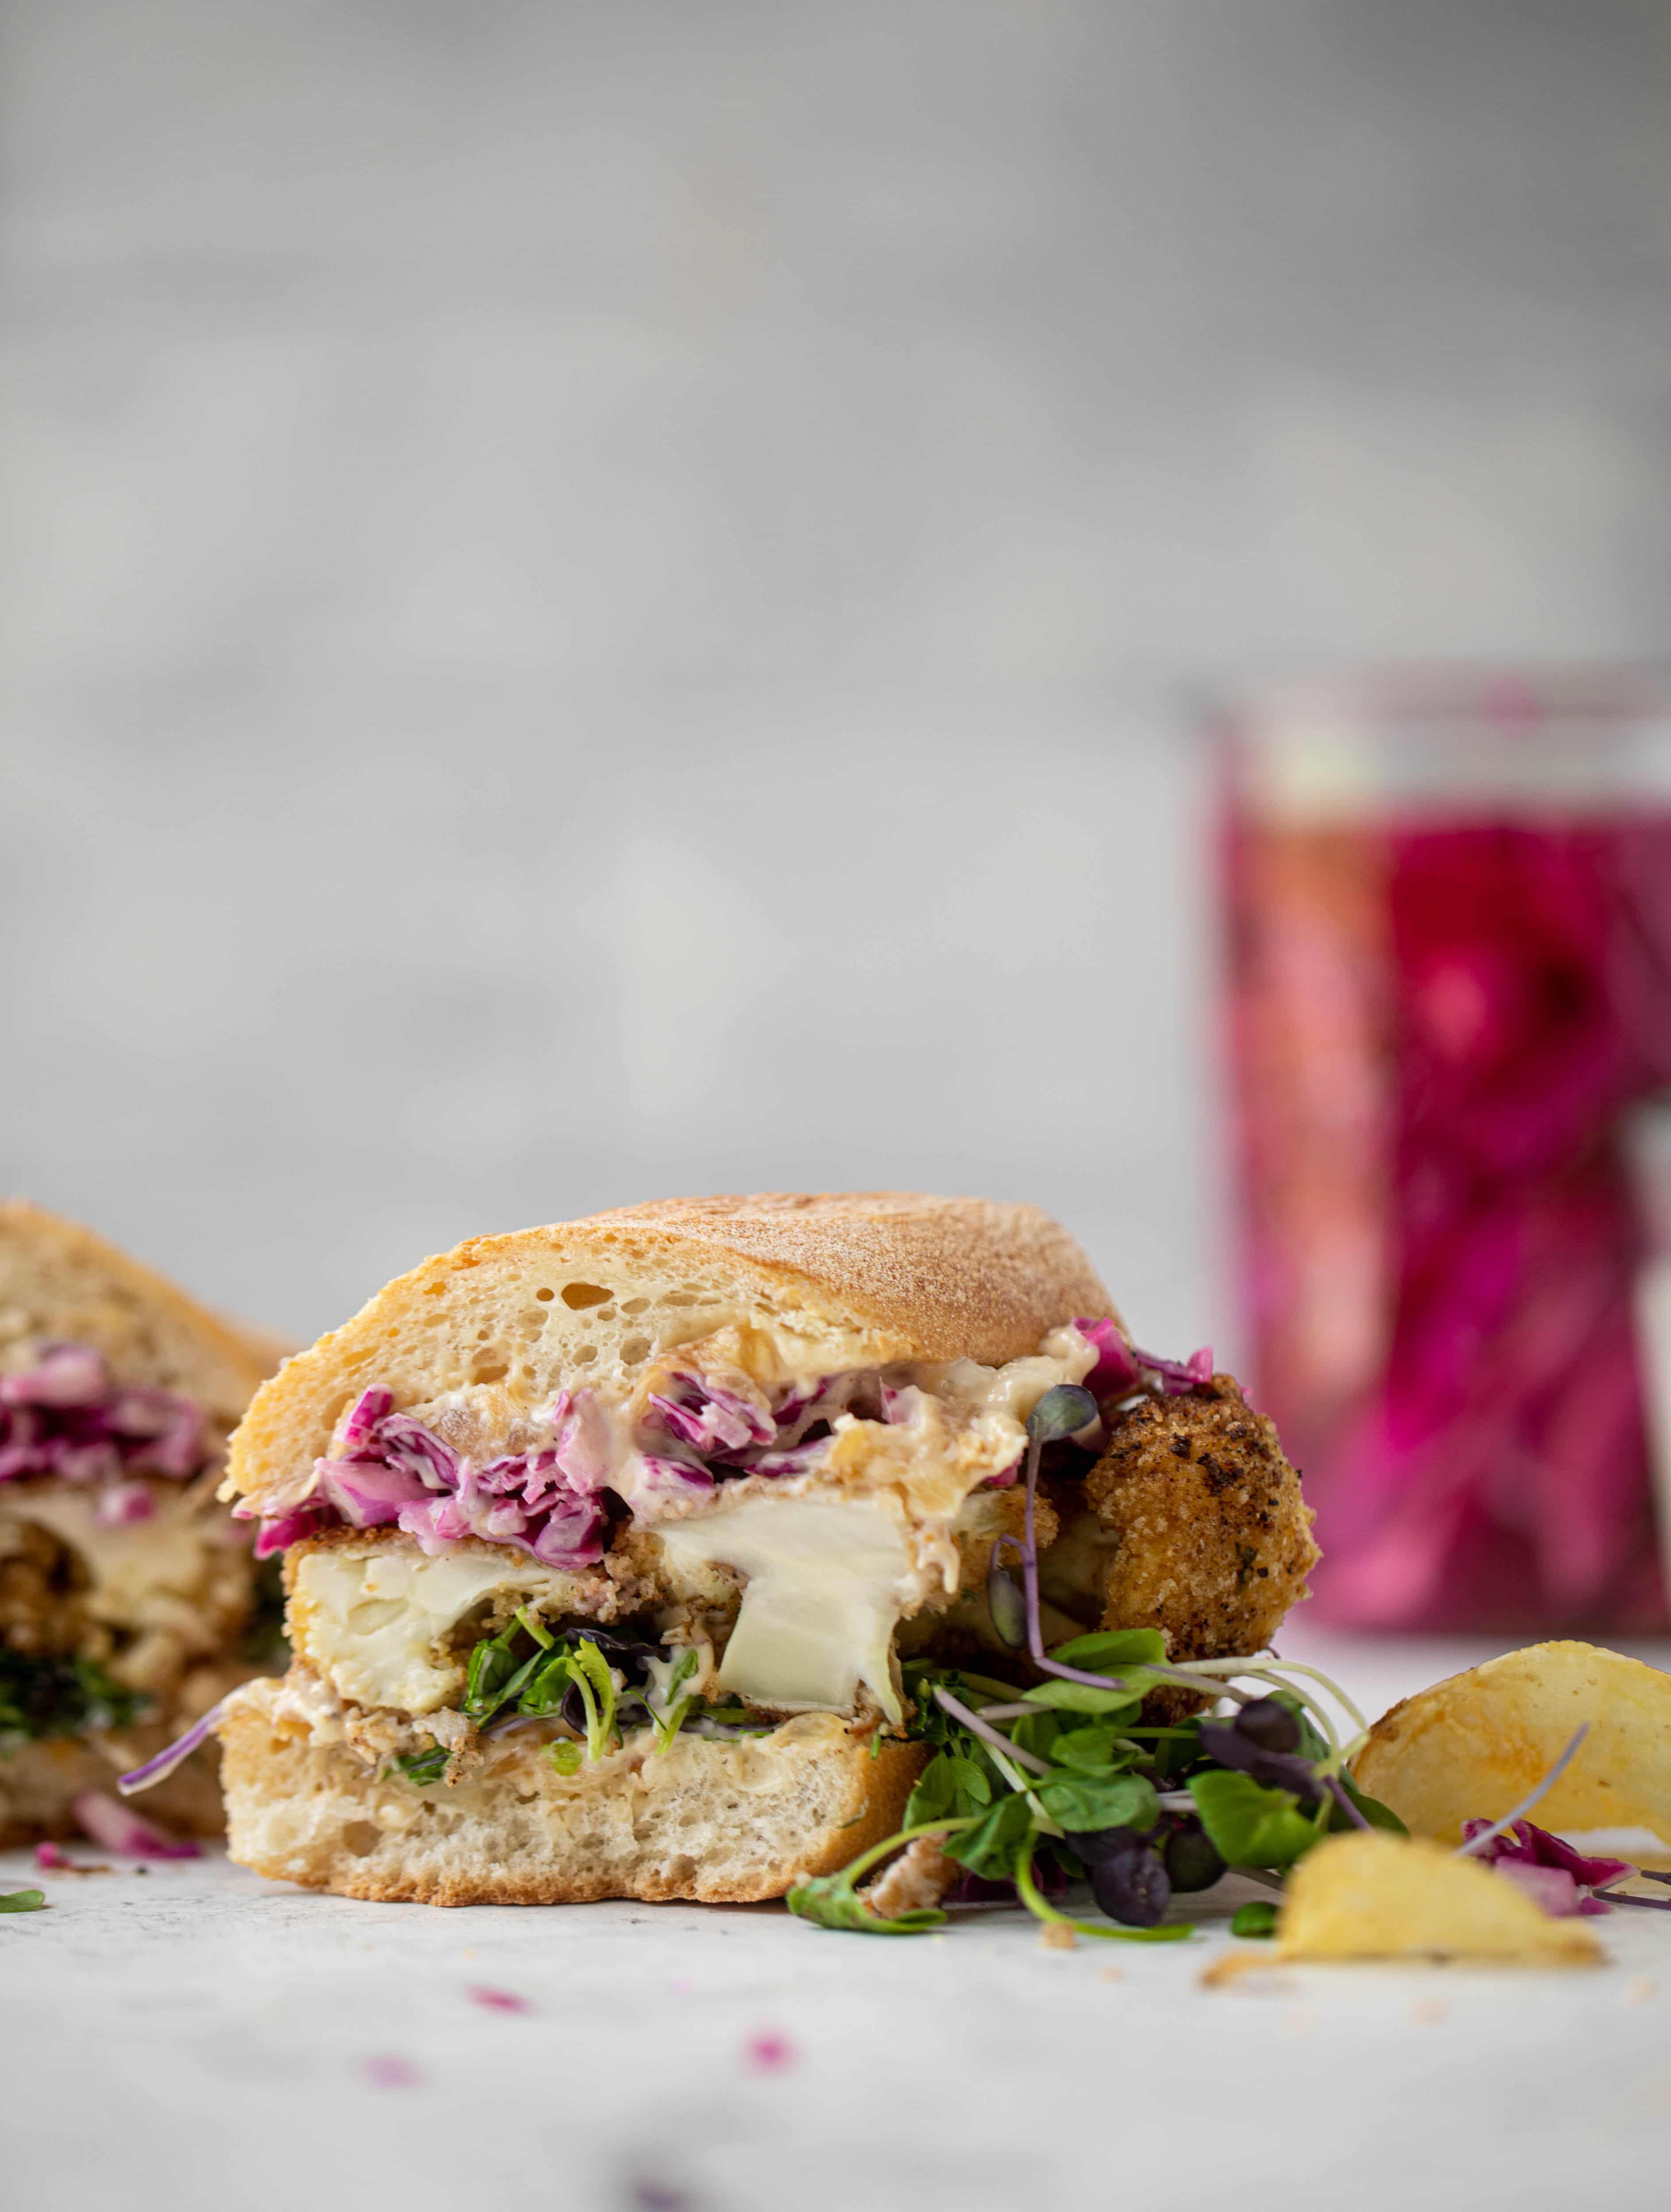 These cauliflower schnitzel sandwiches are full of flavor! Crispy cauliflower, caramelized onion mayo, pickled cabbage and microgreens. Delish!